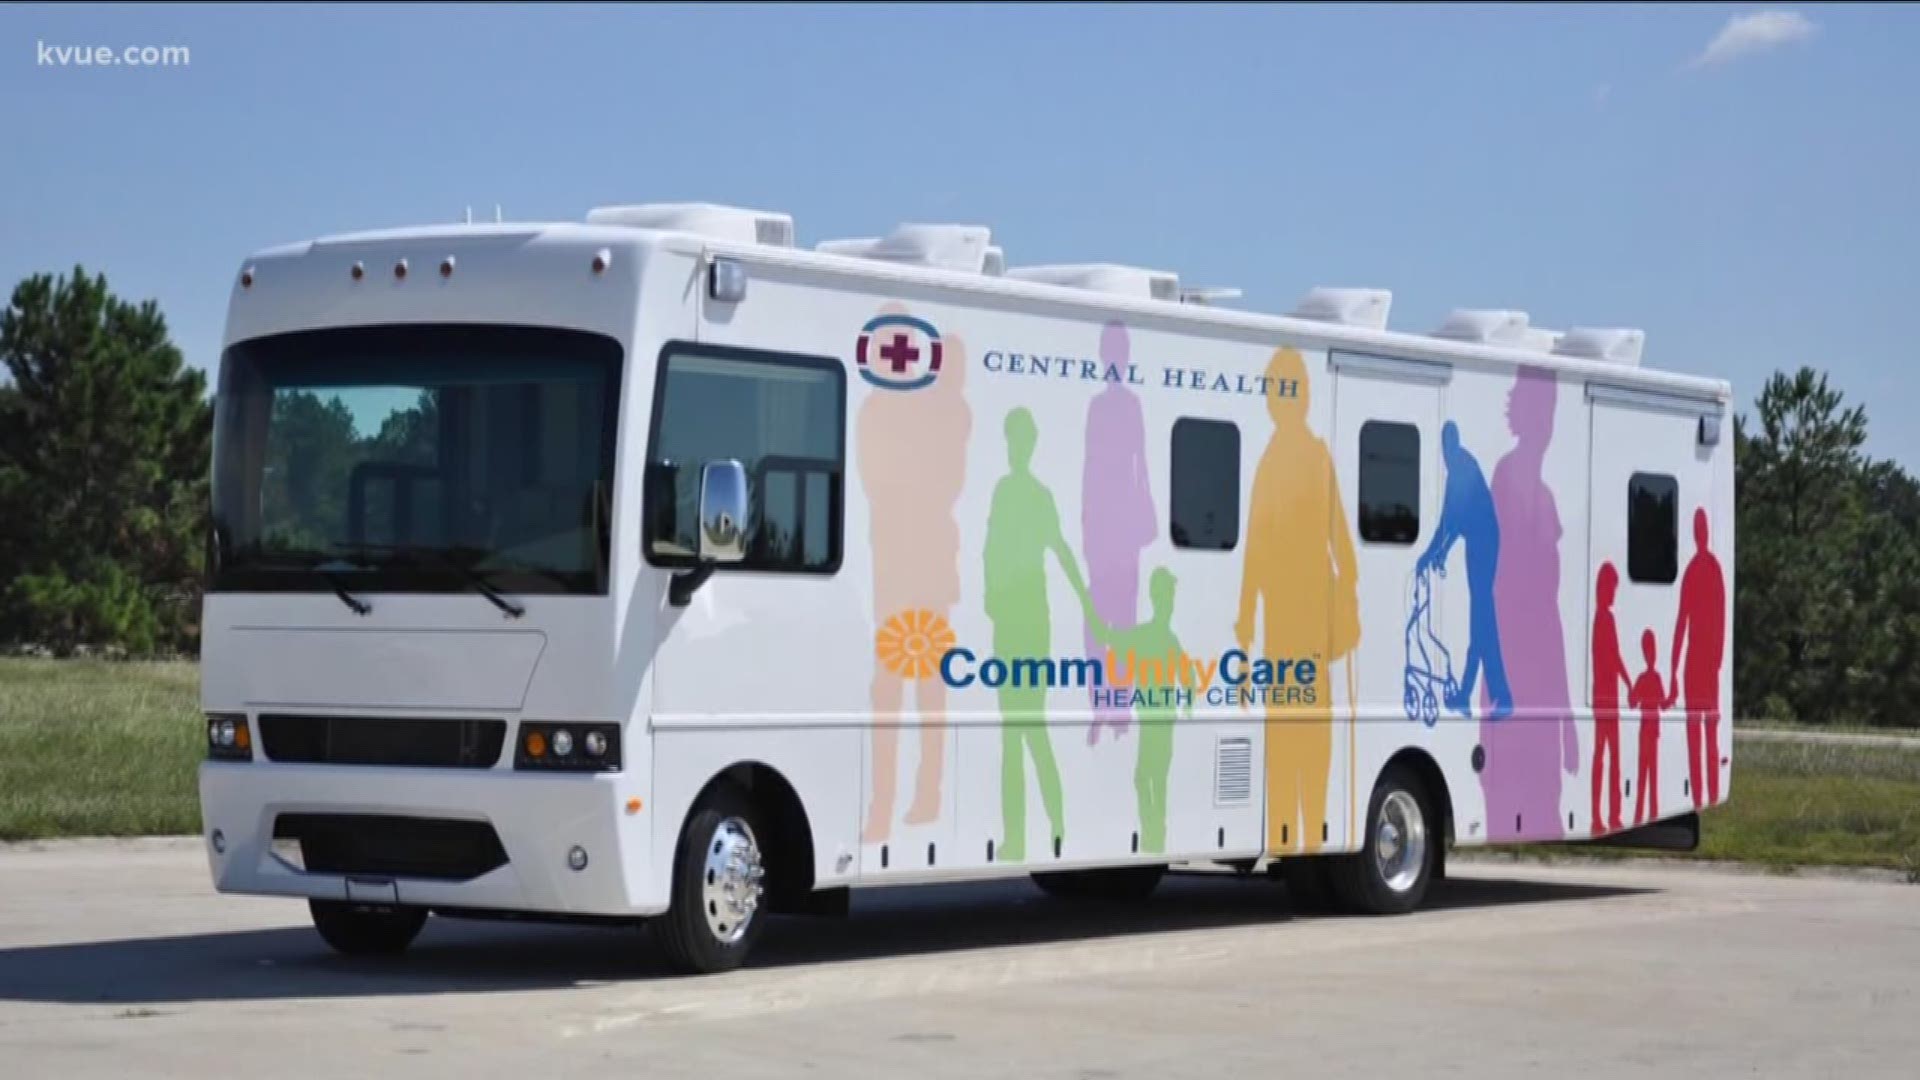 The goal of this mobile clinic is to help bring health care to underserved communities.